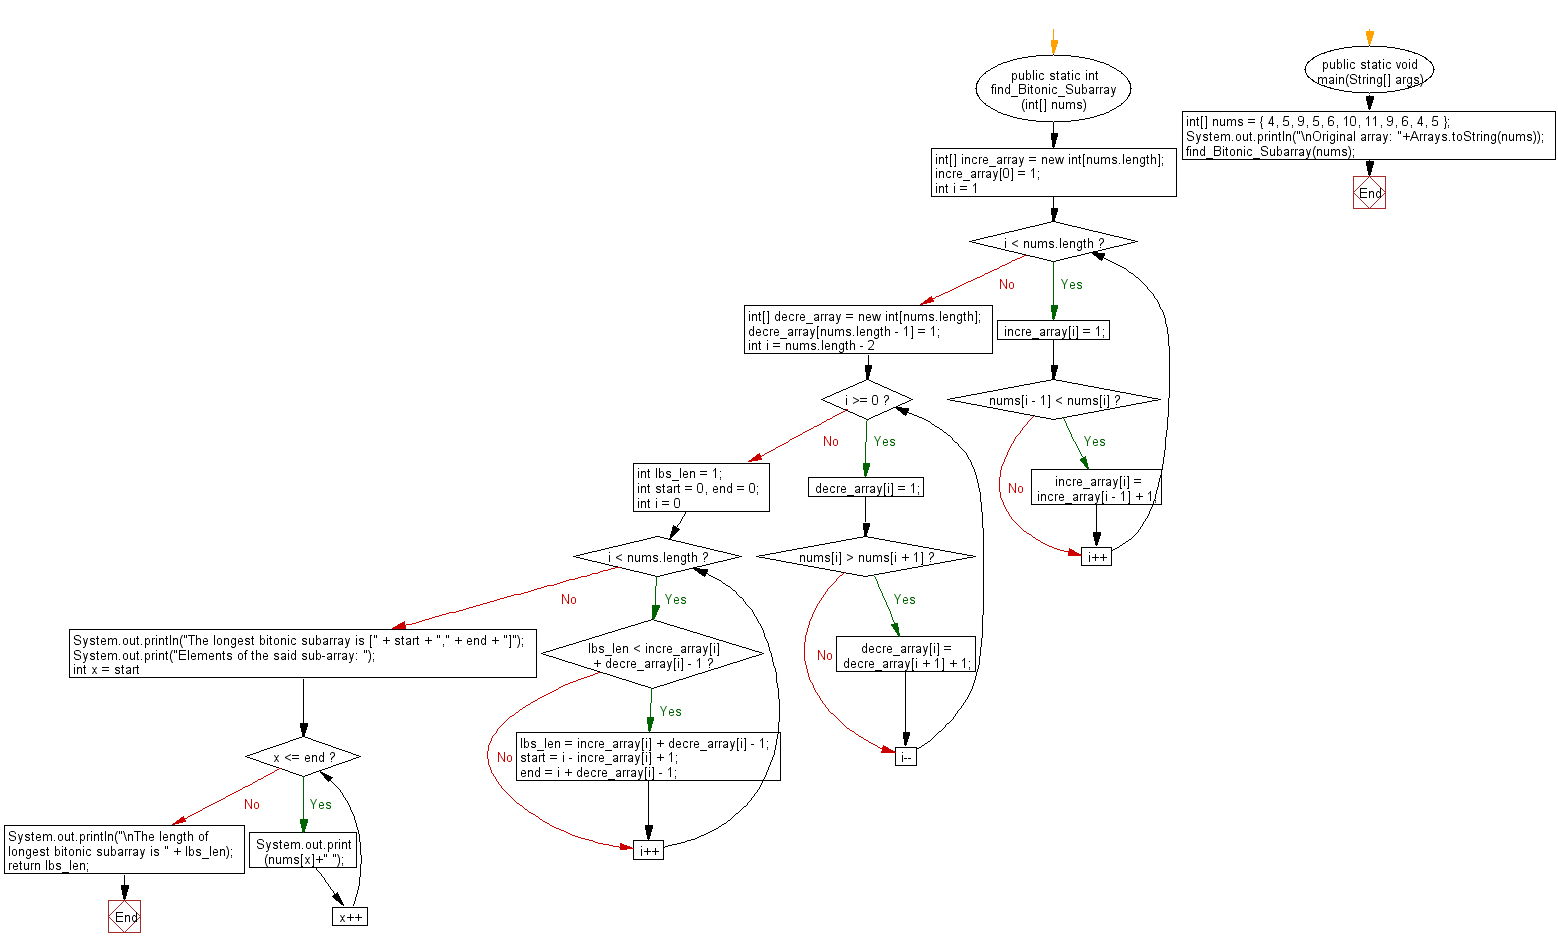 Flowchart: Find Longest Bitonic Subarray in a given array.